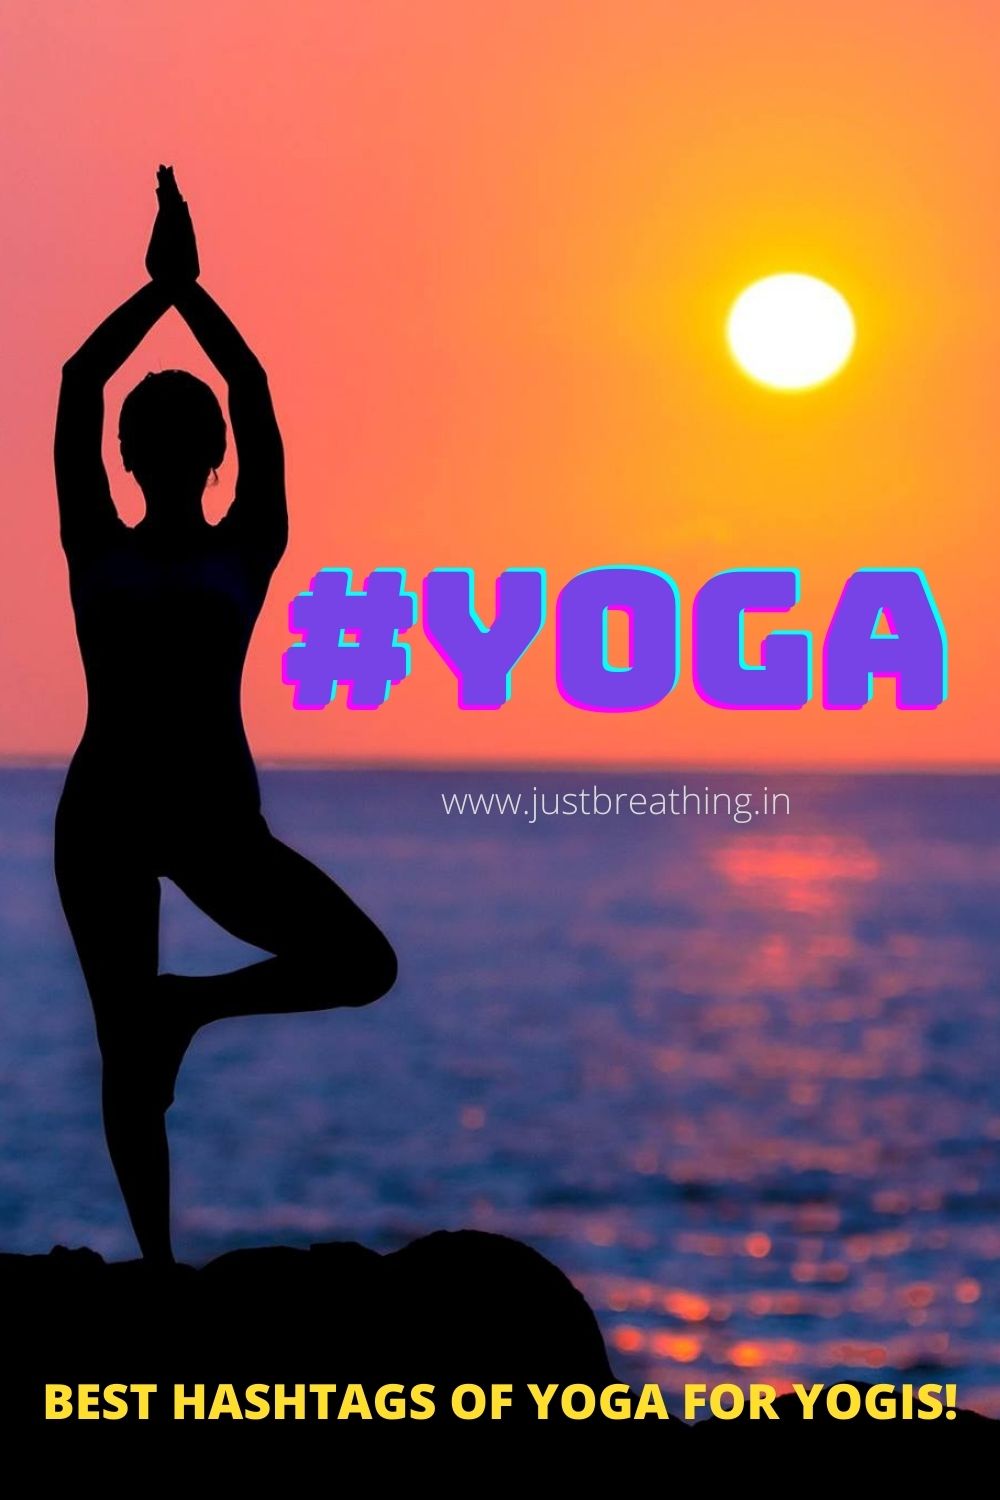 popular yoga hashtags copy and paste - Best yoga hashtags for Instagram to get more likes on Instagram.